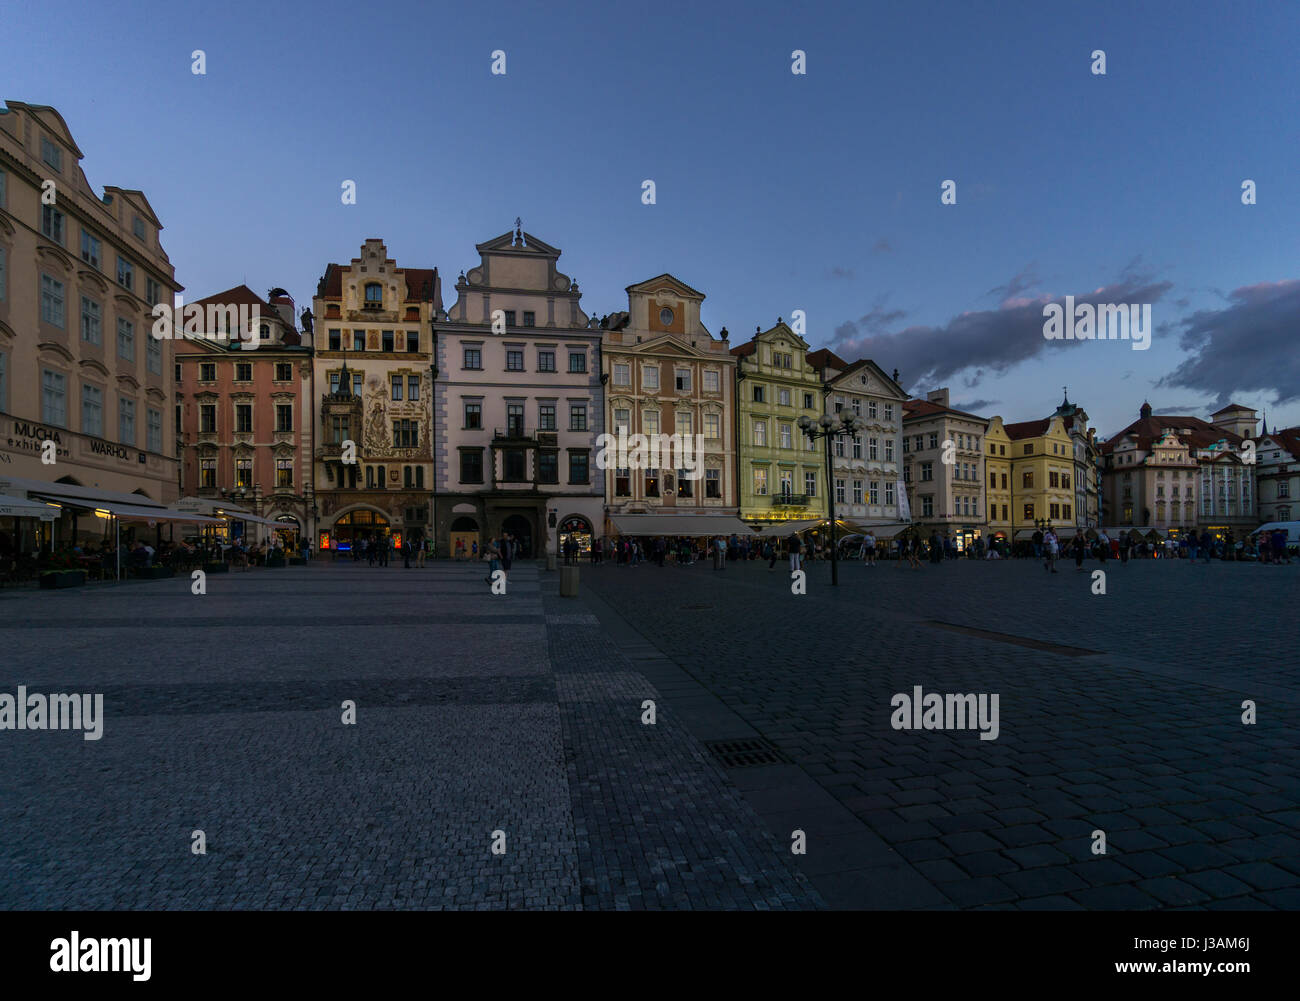 The lights come on, and tourists wander as night falls in Prague in the historic Old Town Square in the blue hour. Stock Photo